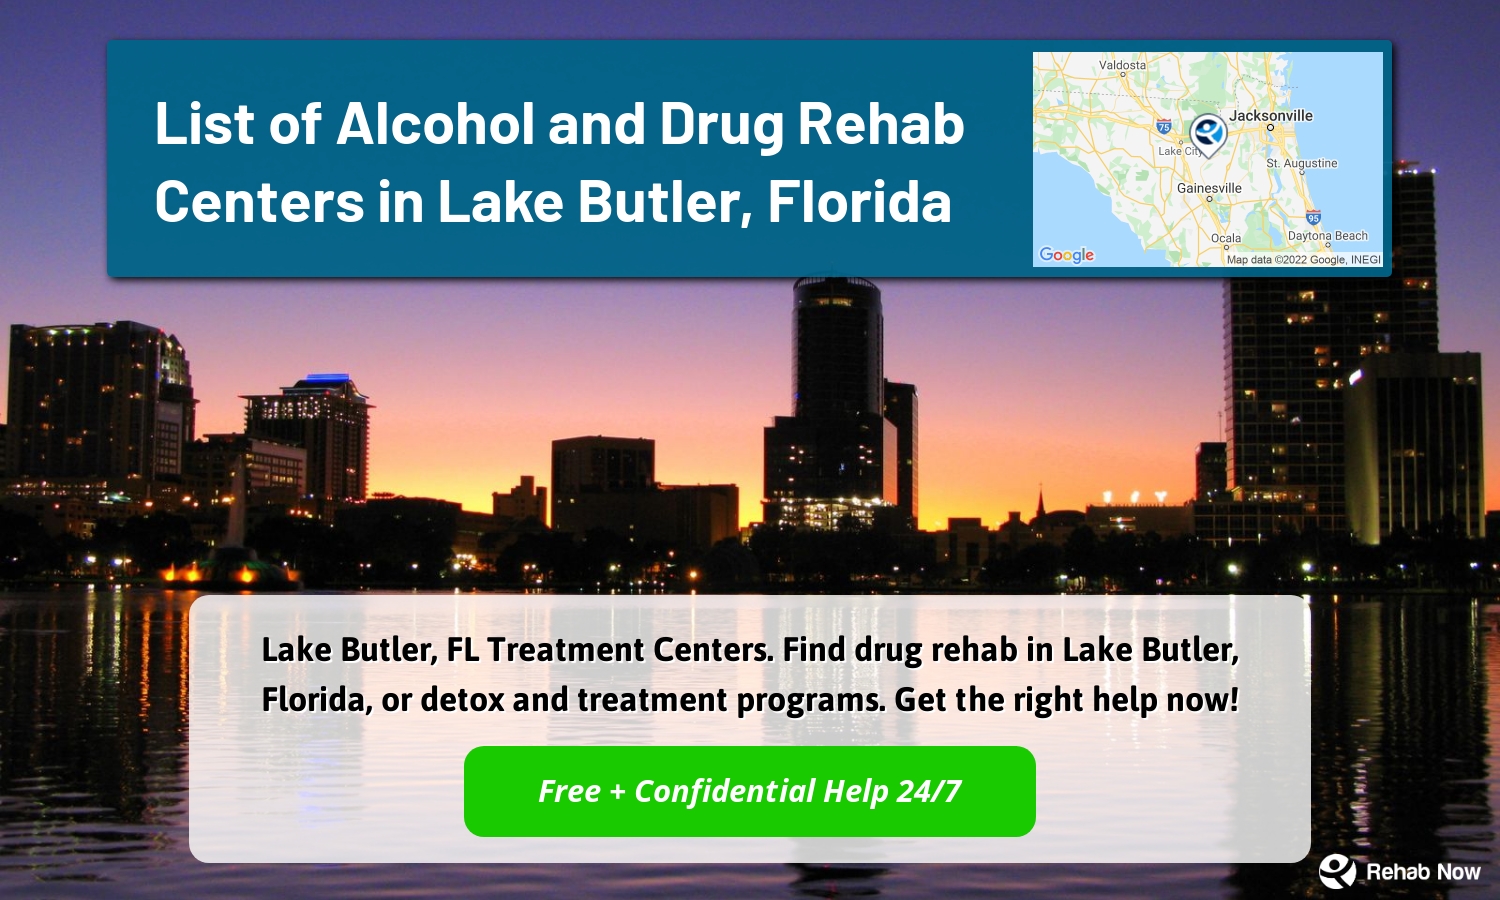 Lake Butler, FL Treatment Centers. Find drug rehab in Lake Butler, Florida, or detox and treatment programs. Get the right help now!